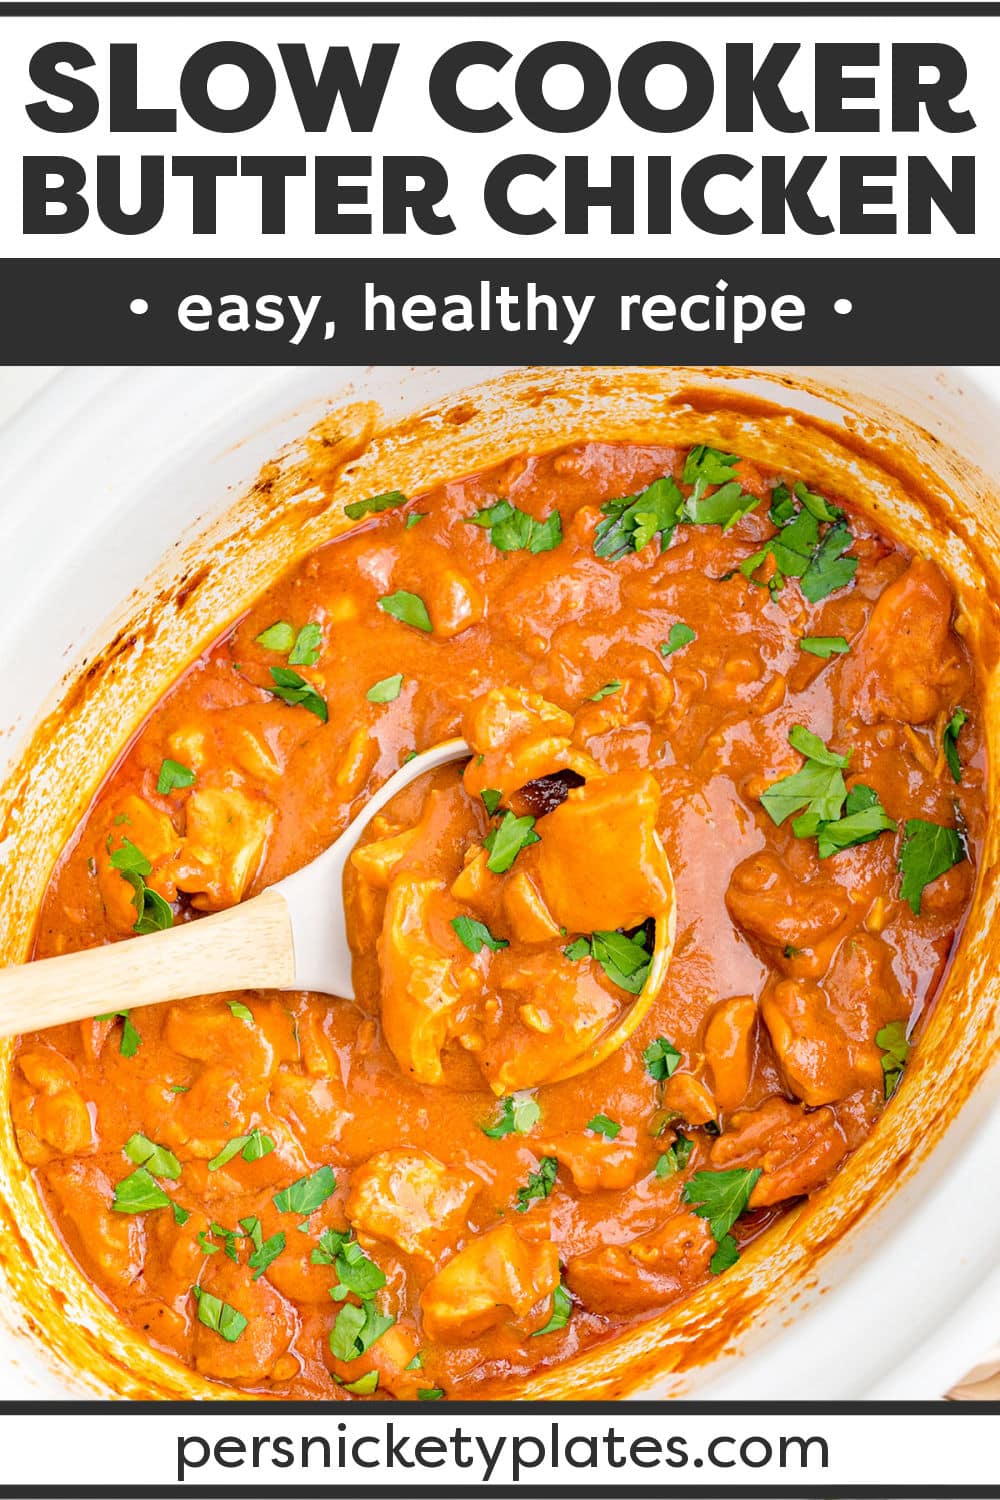 Slow Cooker Butter Chicken is a delicious dairy-free meal that is rich and creamy without adding lots of butter! This healthy Indian-inspired dish is easy to make and perfect for a weeknight dinner in the crockpot. It’s a meal that everyone in your family will love. | www.persnicketyplates.com